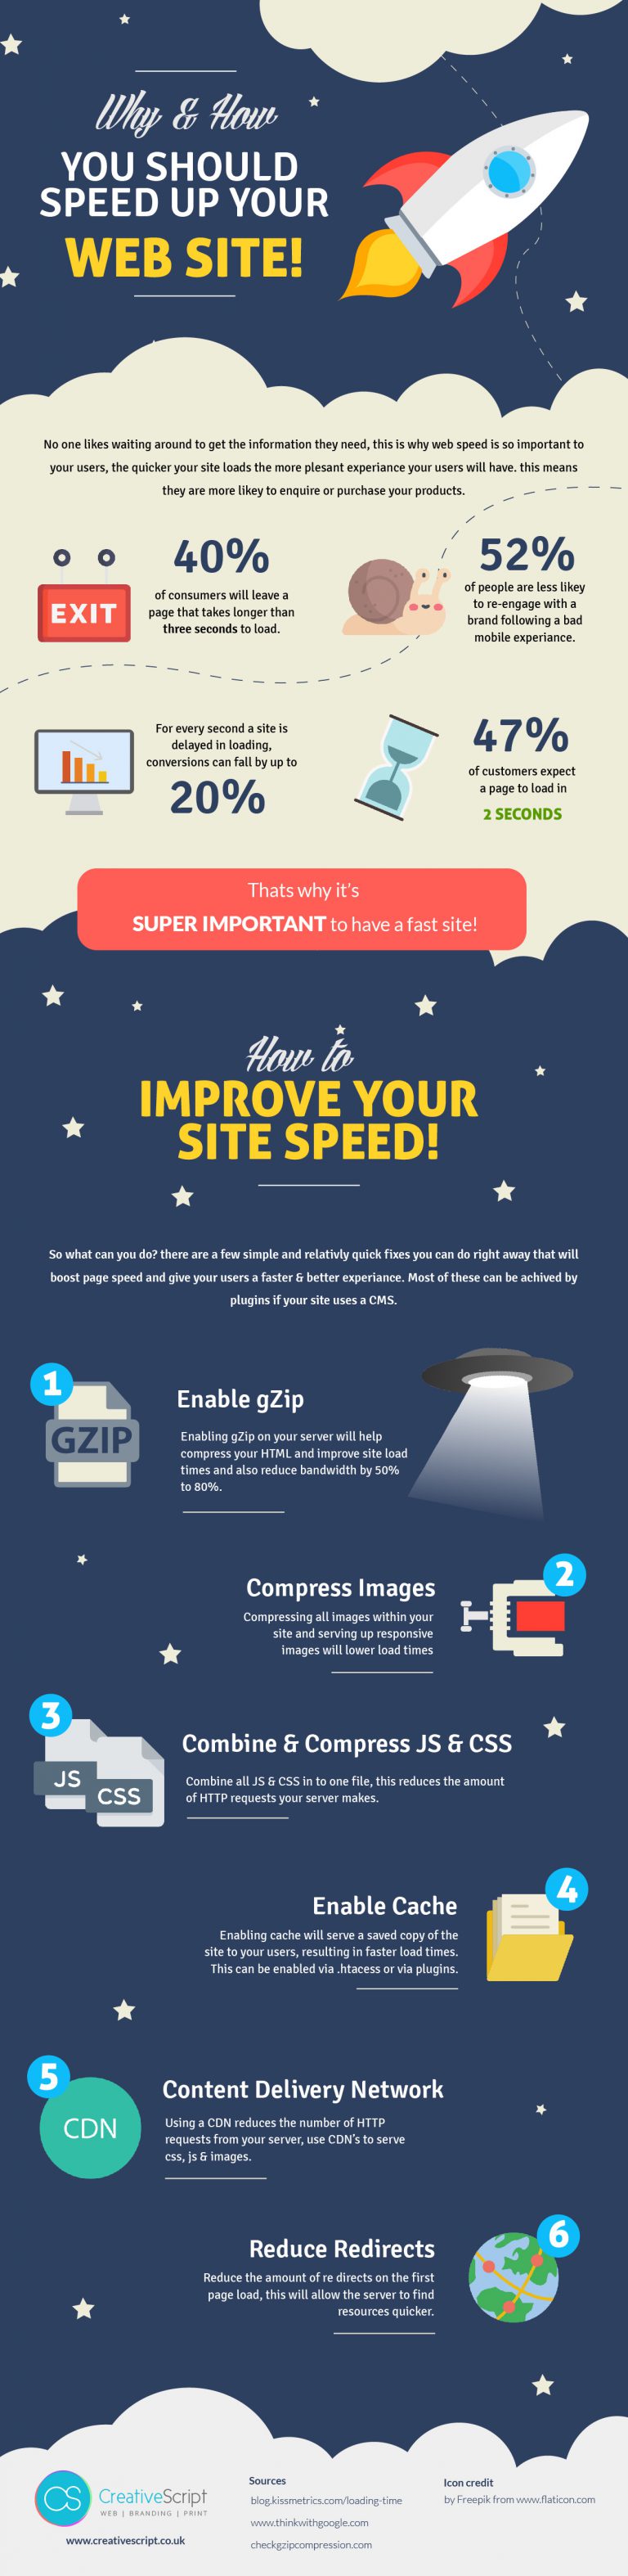 Infographic: Why site speed is so important